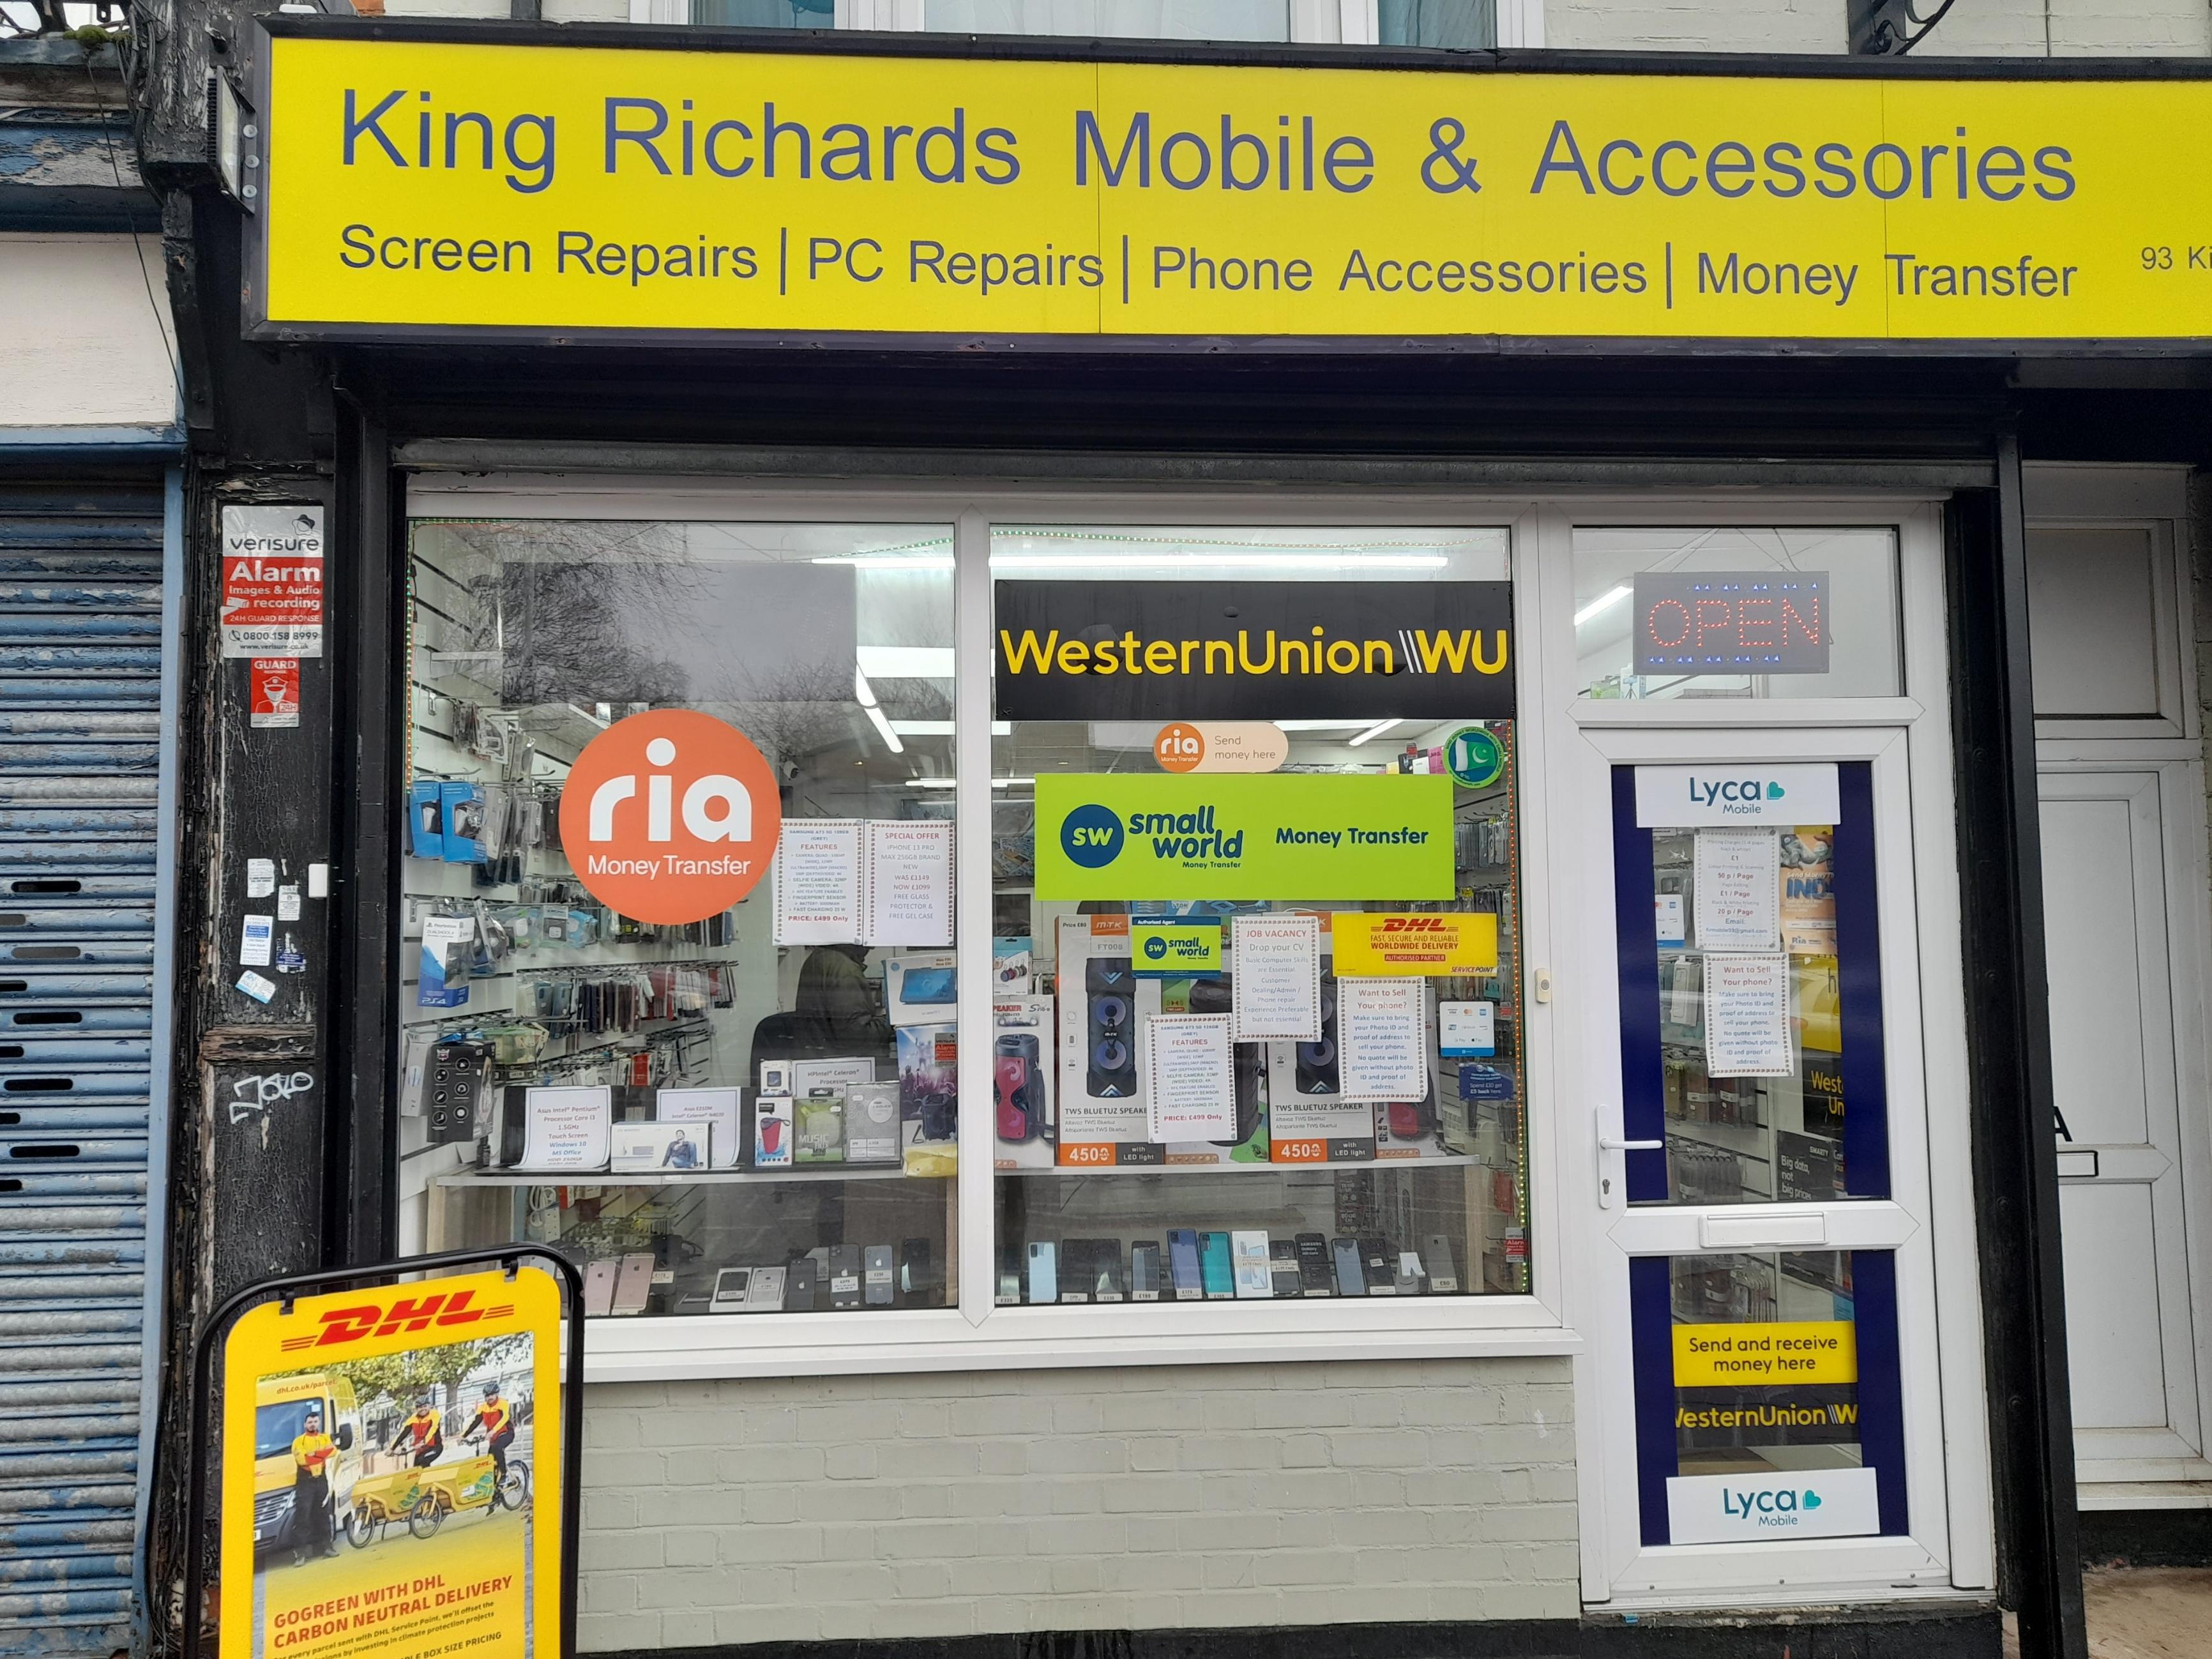 Images DHL Express Service Point (King Richards Mobile & Accessories Ltd)